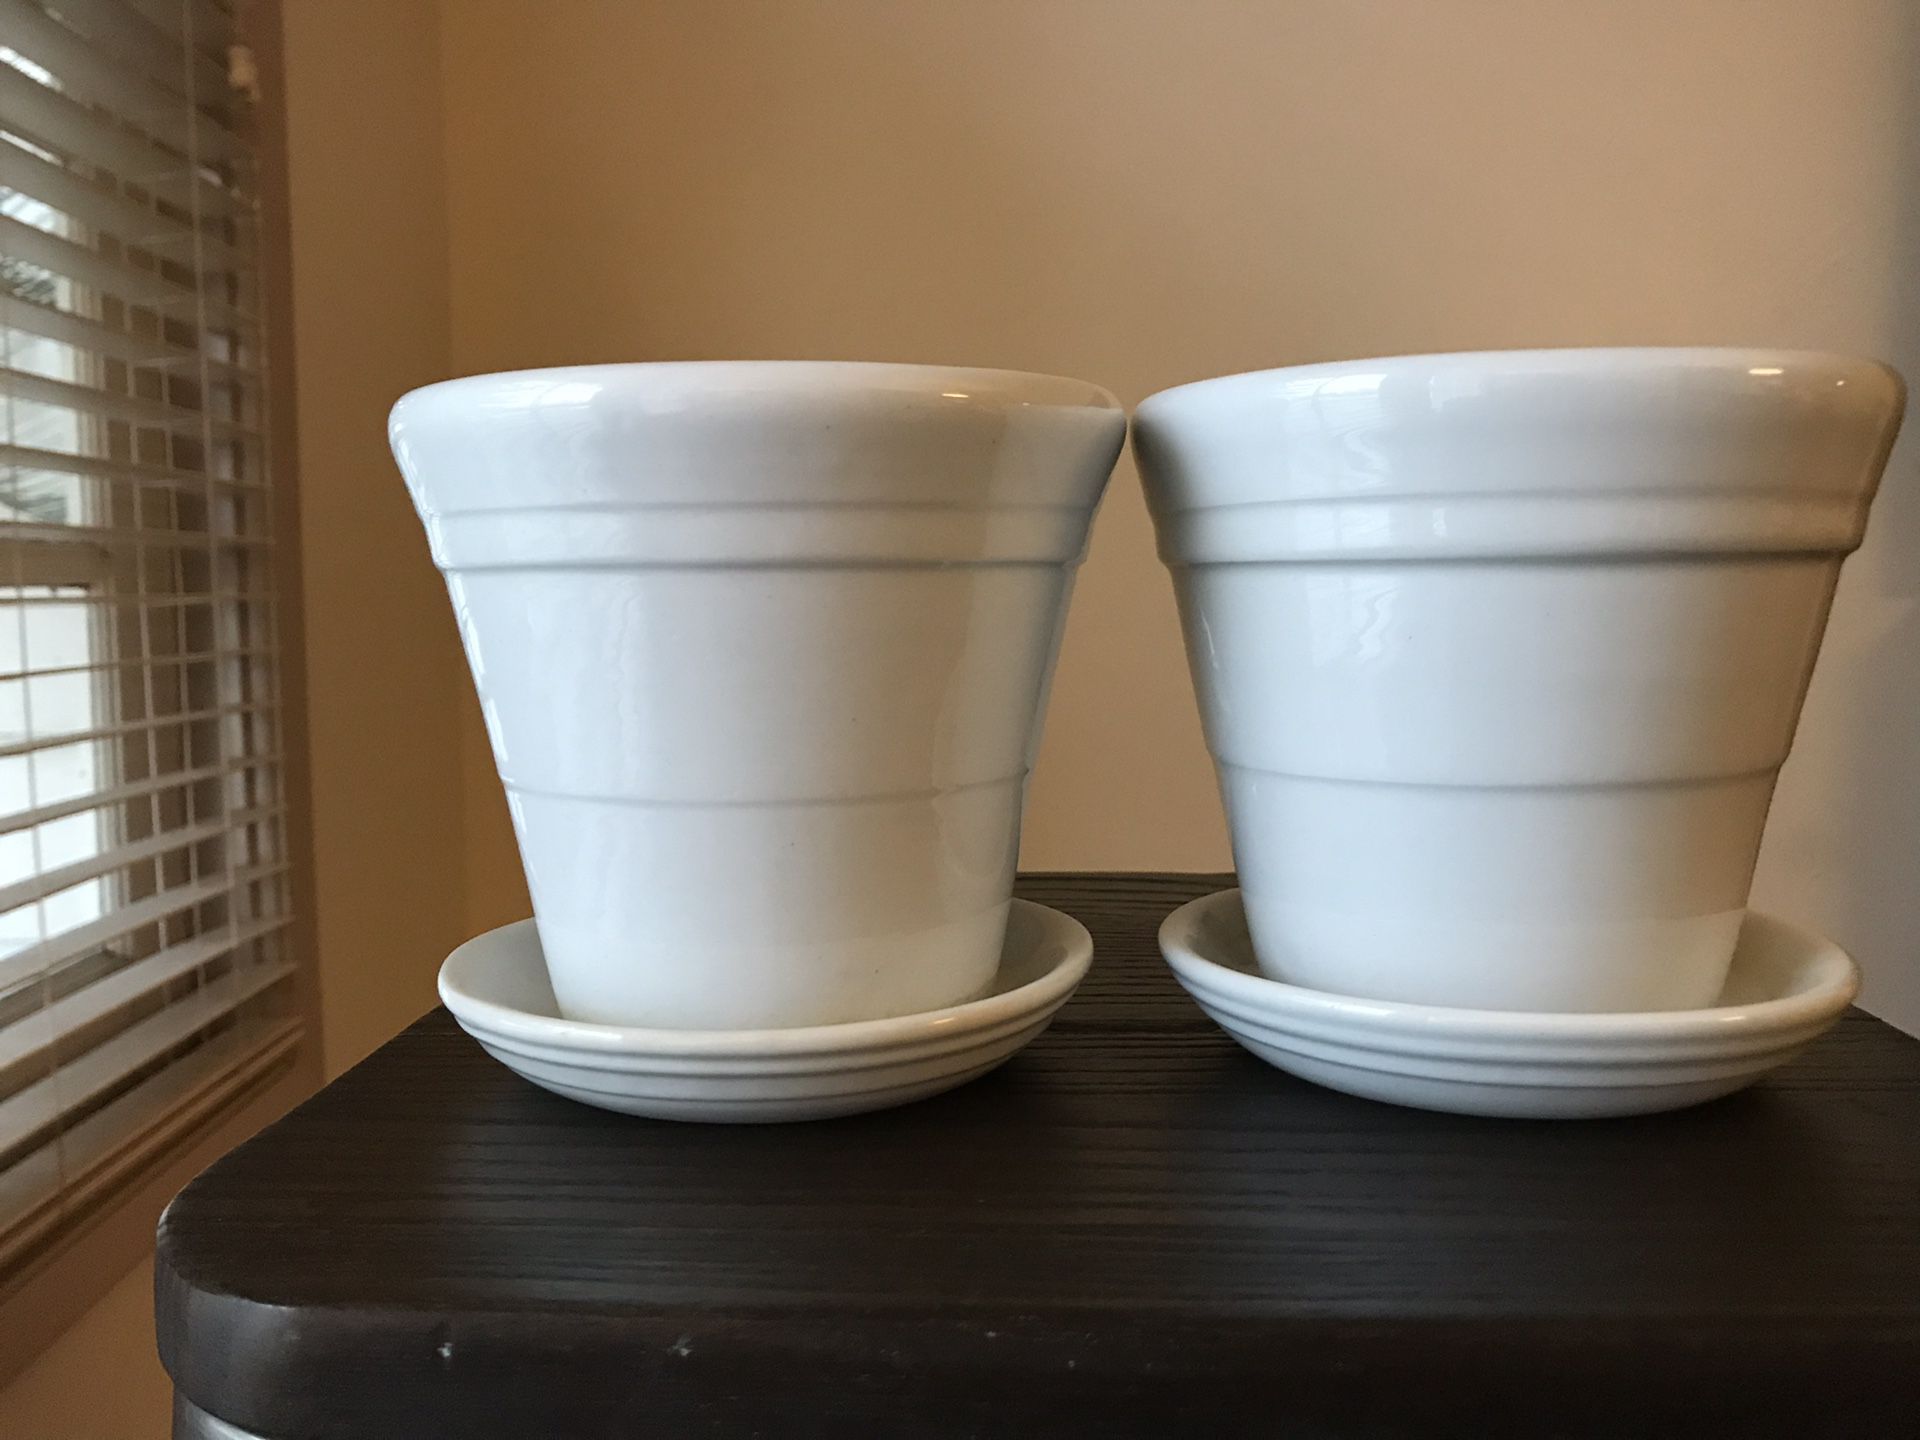 2 Very Pale Blue Ceramic Flower Pots with Removable Saucers (4.75in tall & 5.5in across the top)